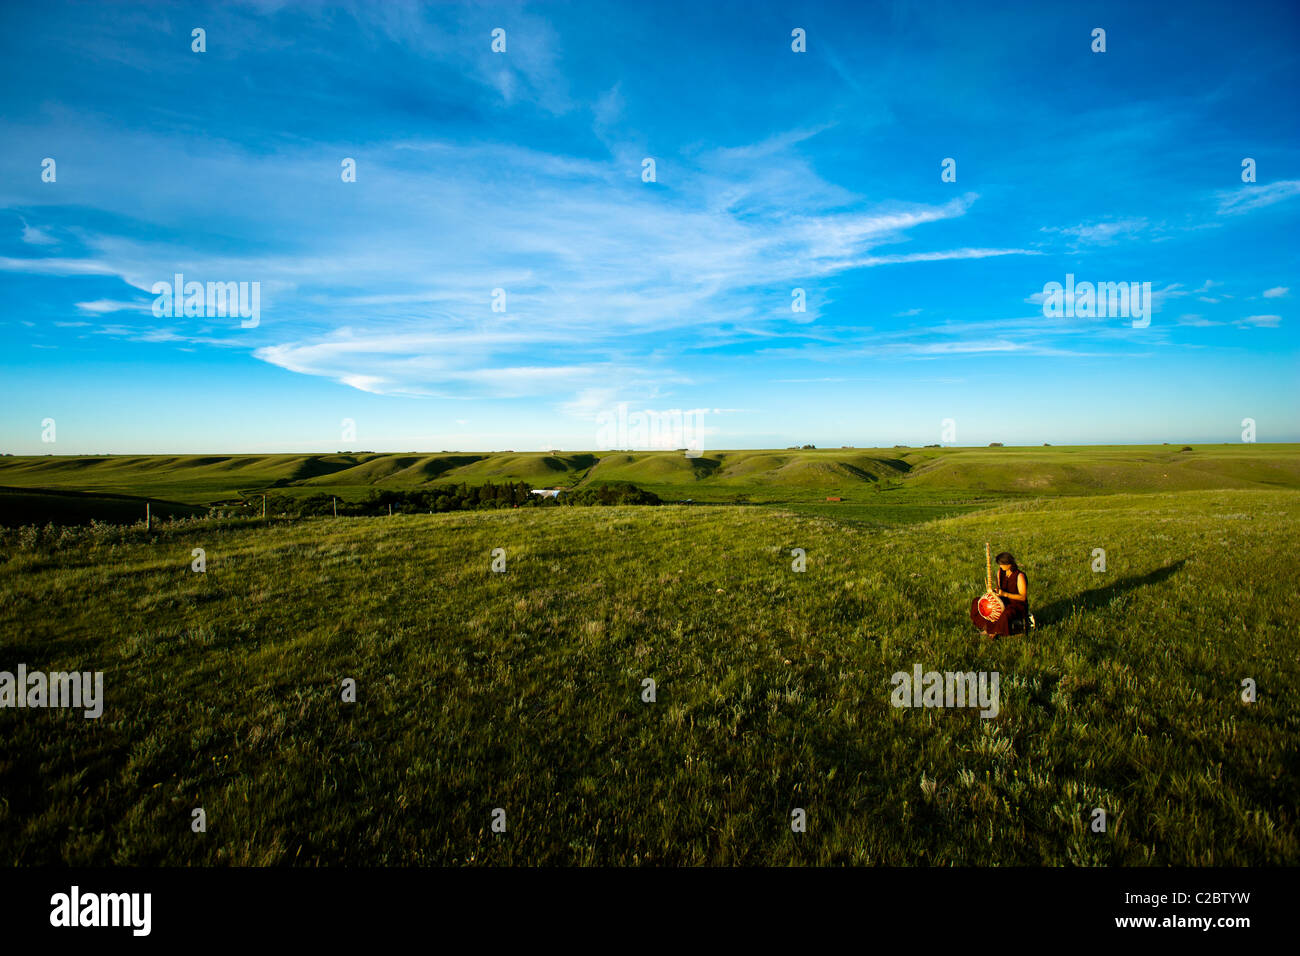 Vast open space of the Canadian prairies with a lone female playing an instrument Stock Photo